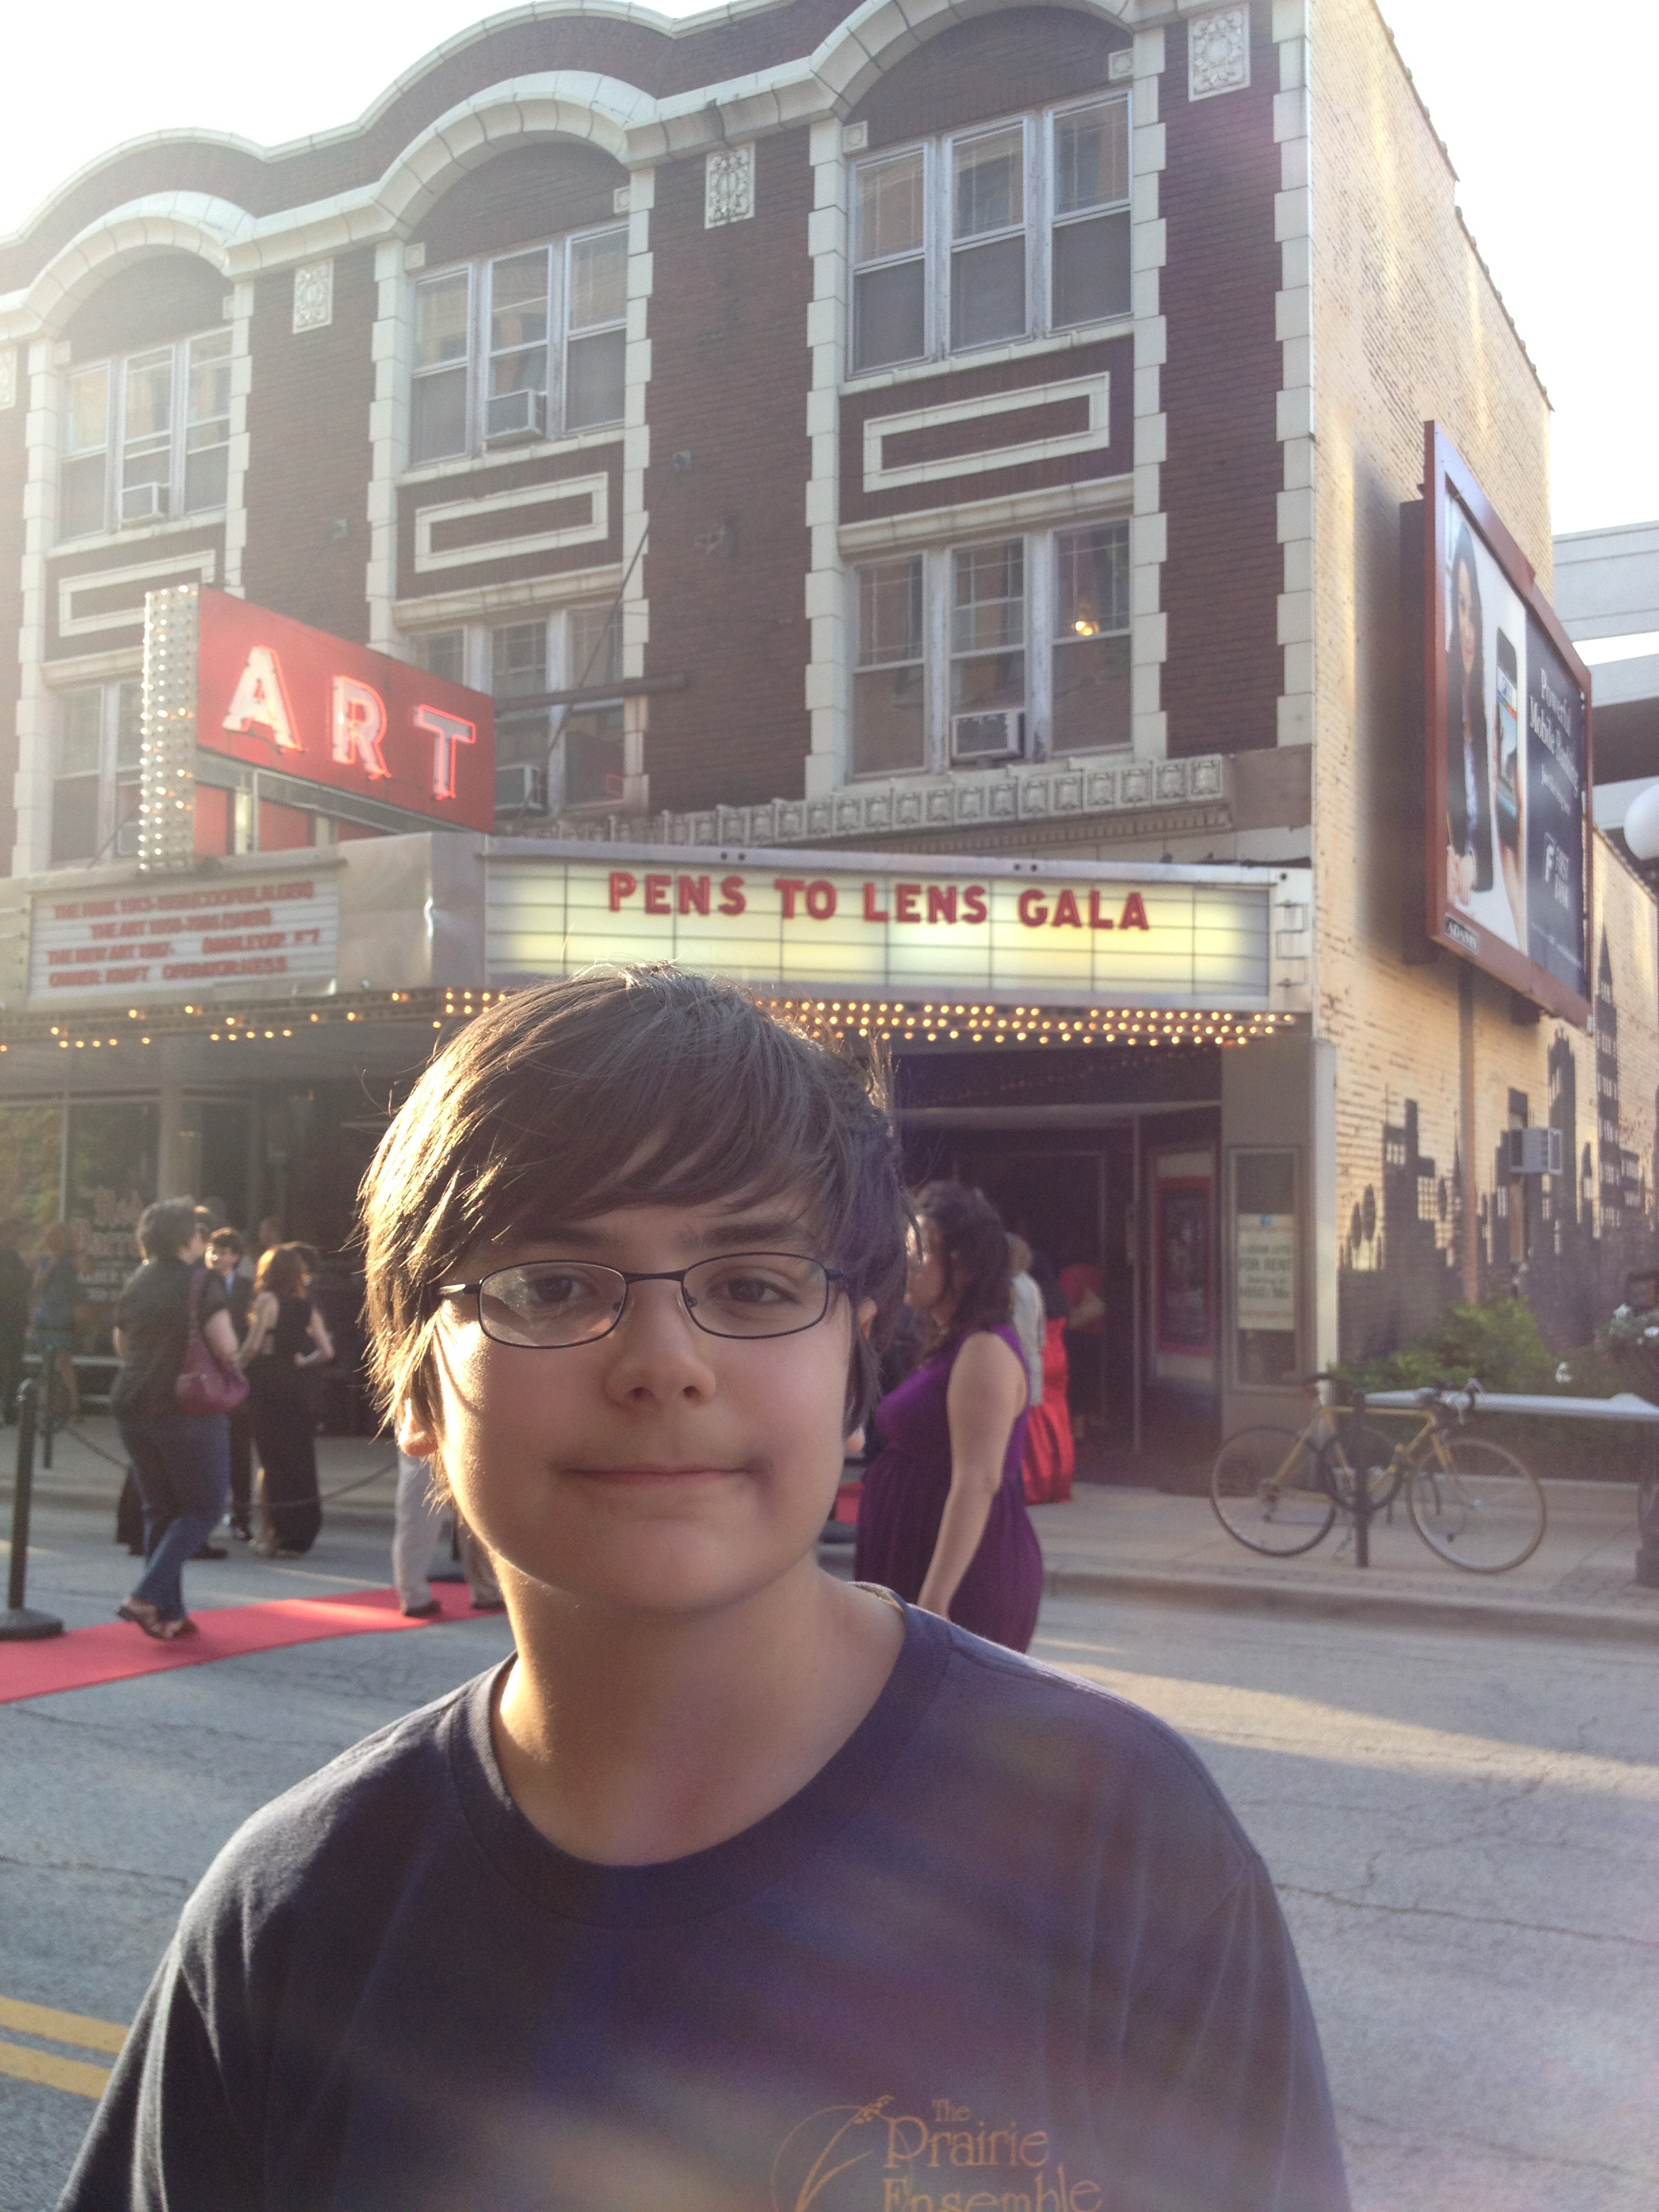 My 11-year-old son, and aspiring screenwriter, at his first film festival!